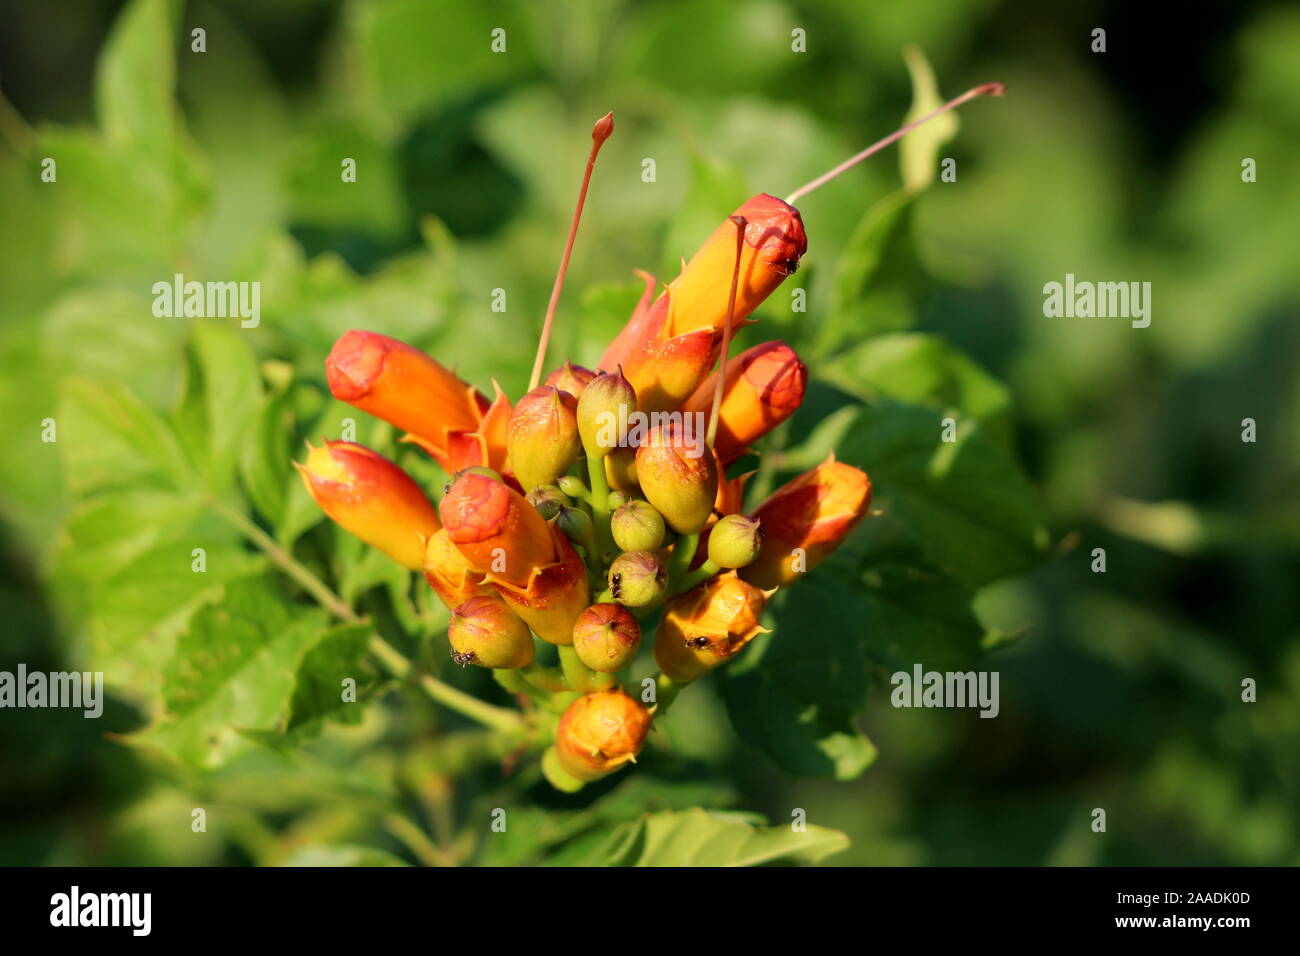 Dense bunch of Trumpet vine or Campsis radicans or Trumpet creeper or Cow itch vine or Hummingbird vine flowering deciduous woody vine plant Stock Photo